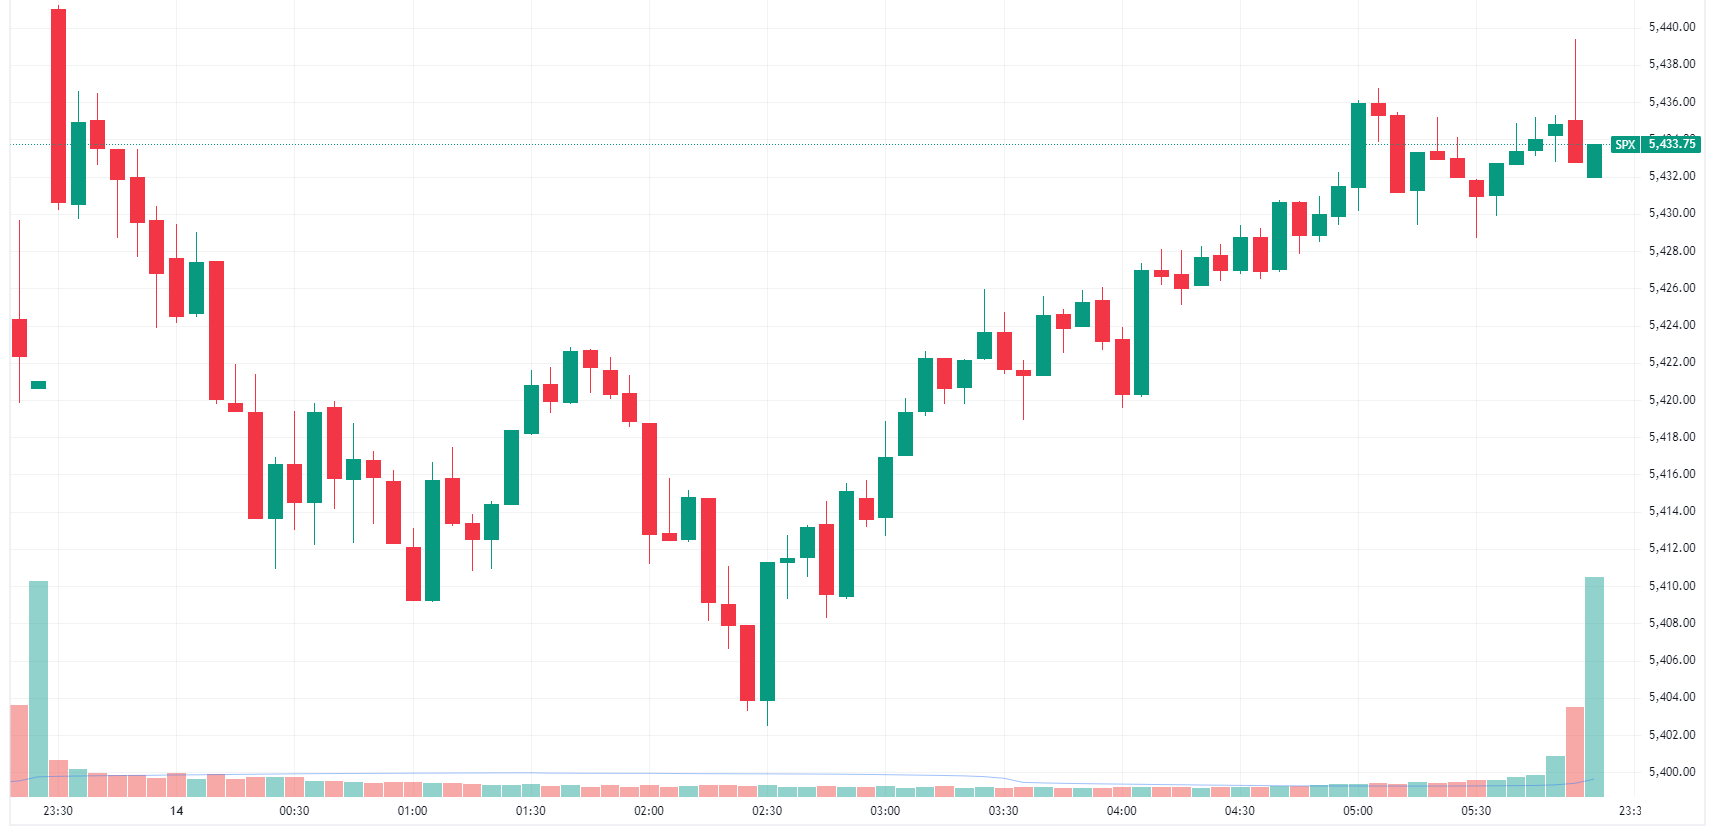 S&P 500 recovered from midday weakness to close near session highs (Source: TradingView)